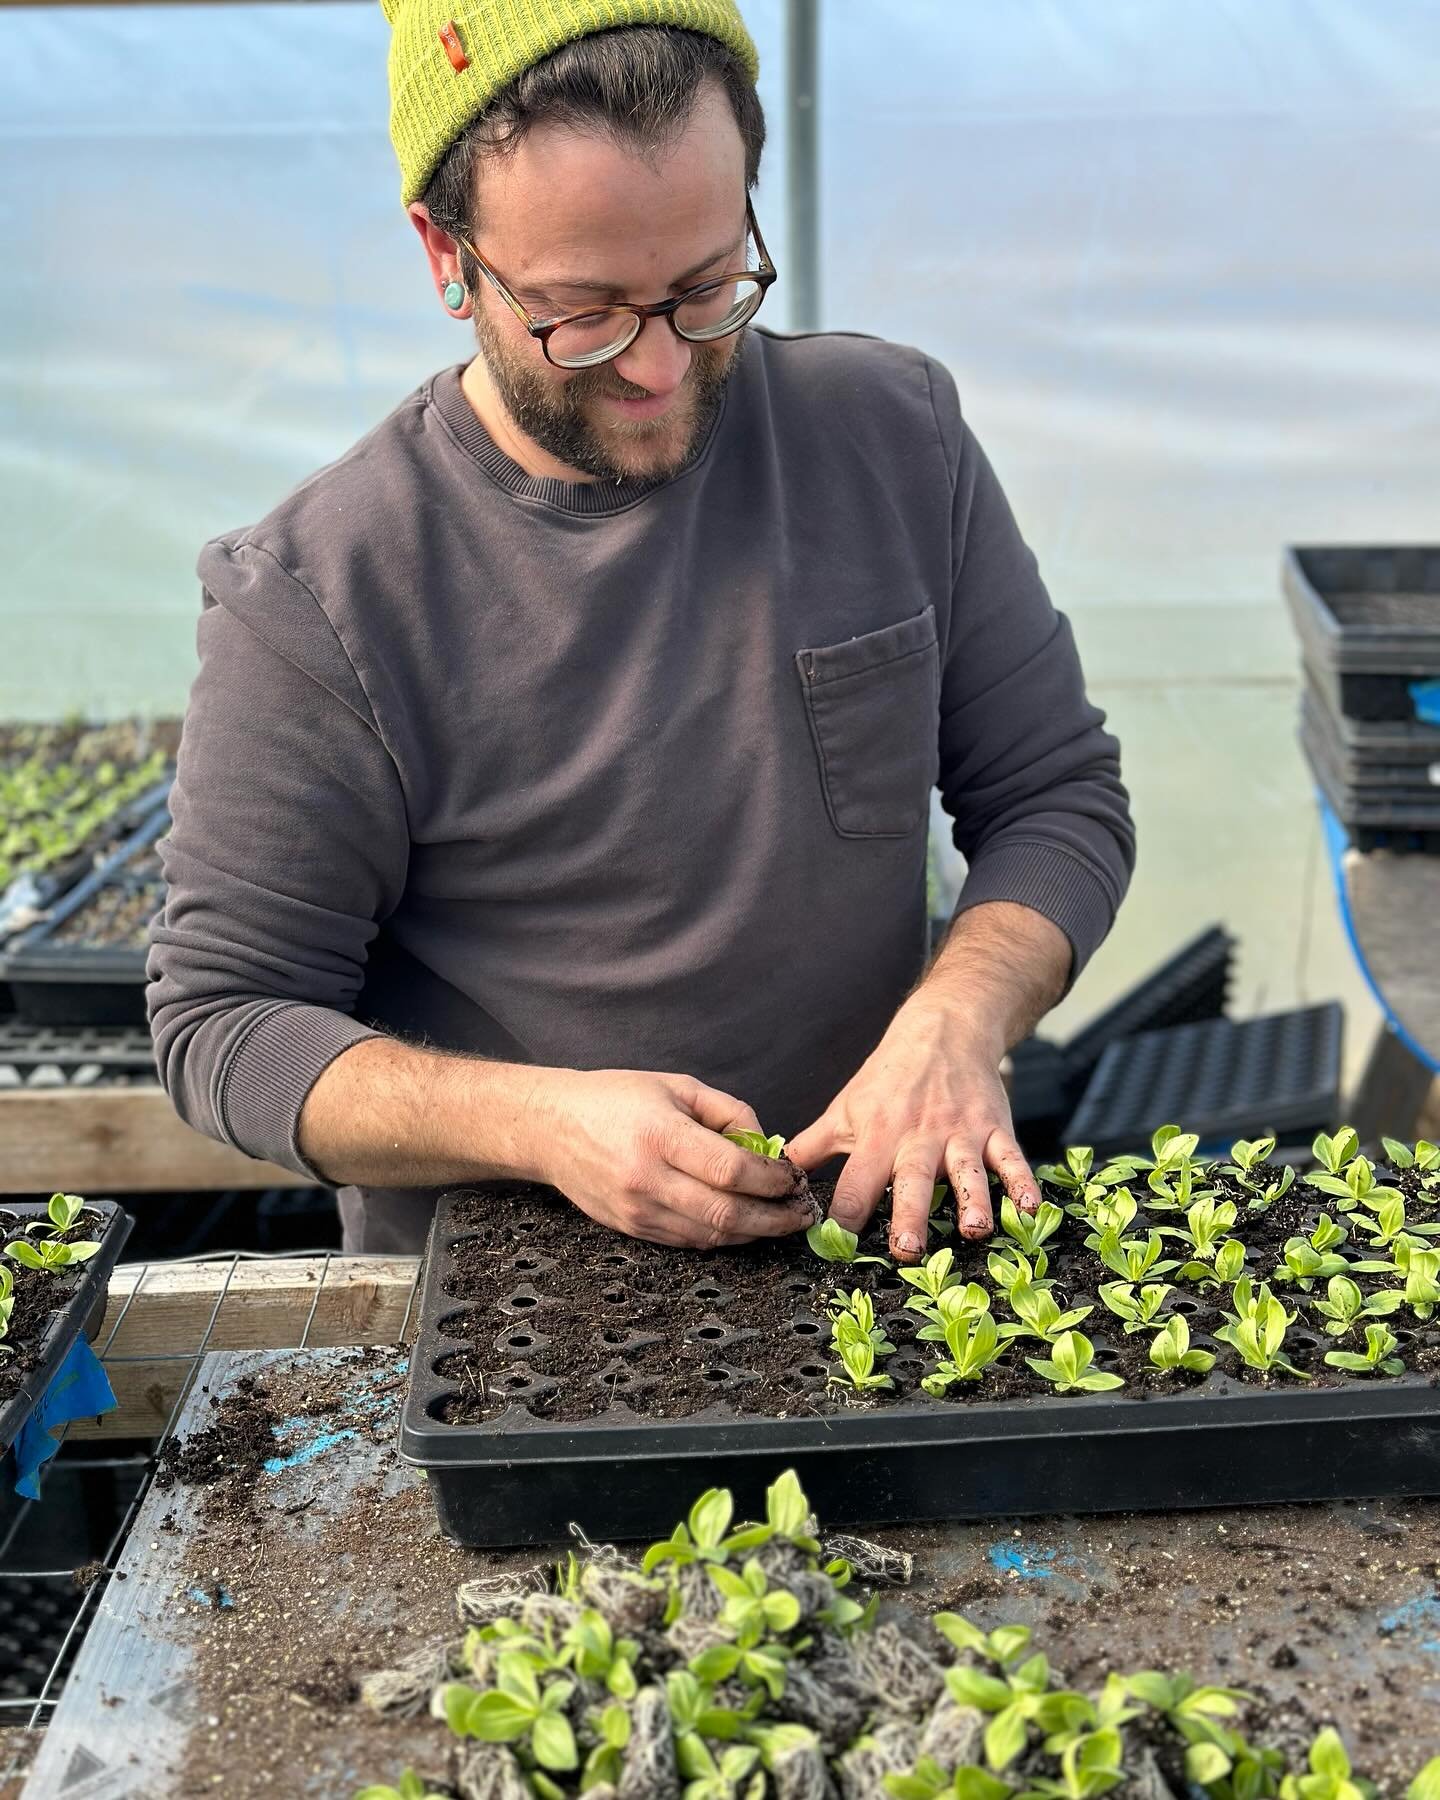 @sparkbagel back in the greenhouse tending to his lisianthus! My fall late night plug purchasing habit is fueled in part by Shawn agreeing to grow all the lisianthus for the farm. Thousand more potted up as the first rounds get planted into the sprin